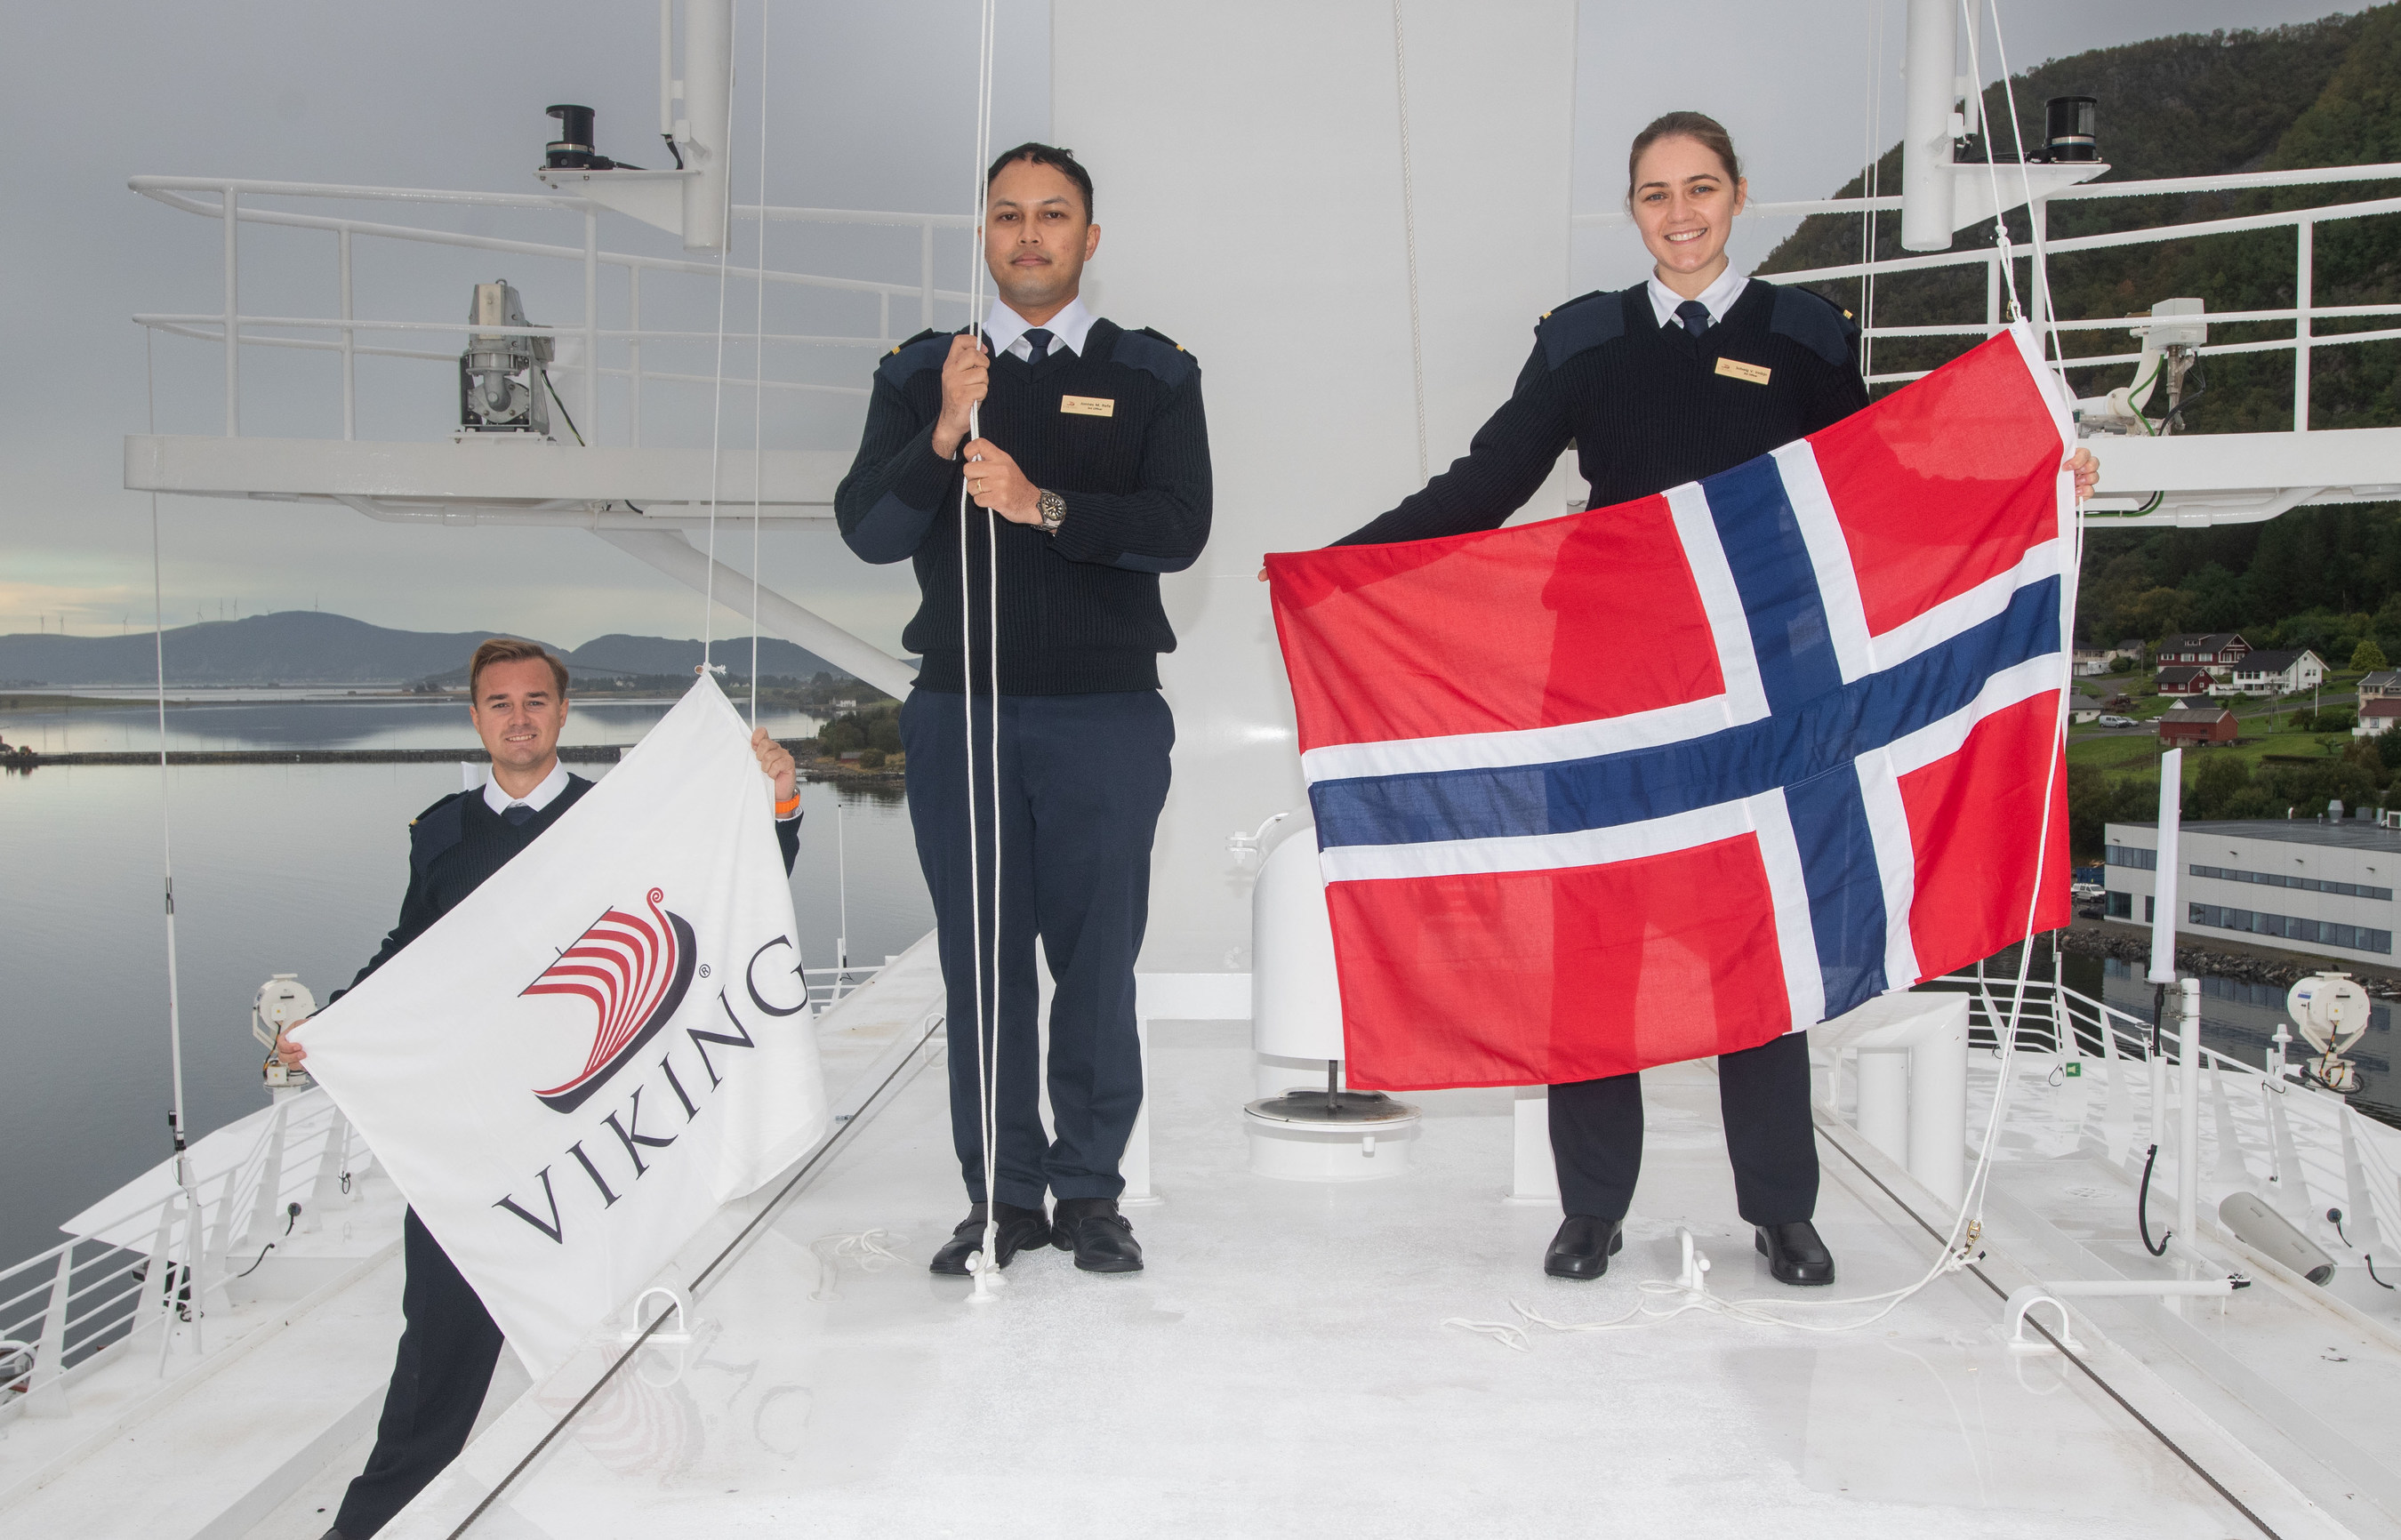 The Viking Polaris crew, pictured here, raising the ship’s new flags following the delivery ceremony. For more information, visit www.viking.com.